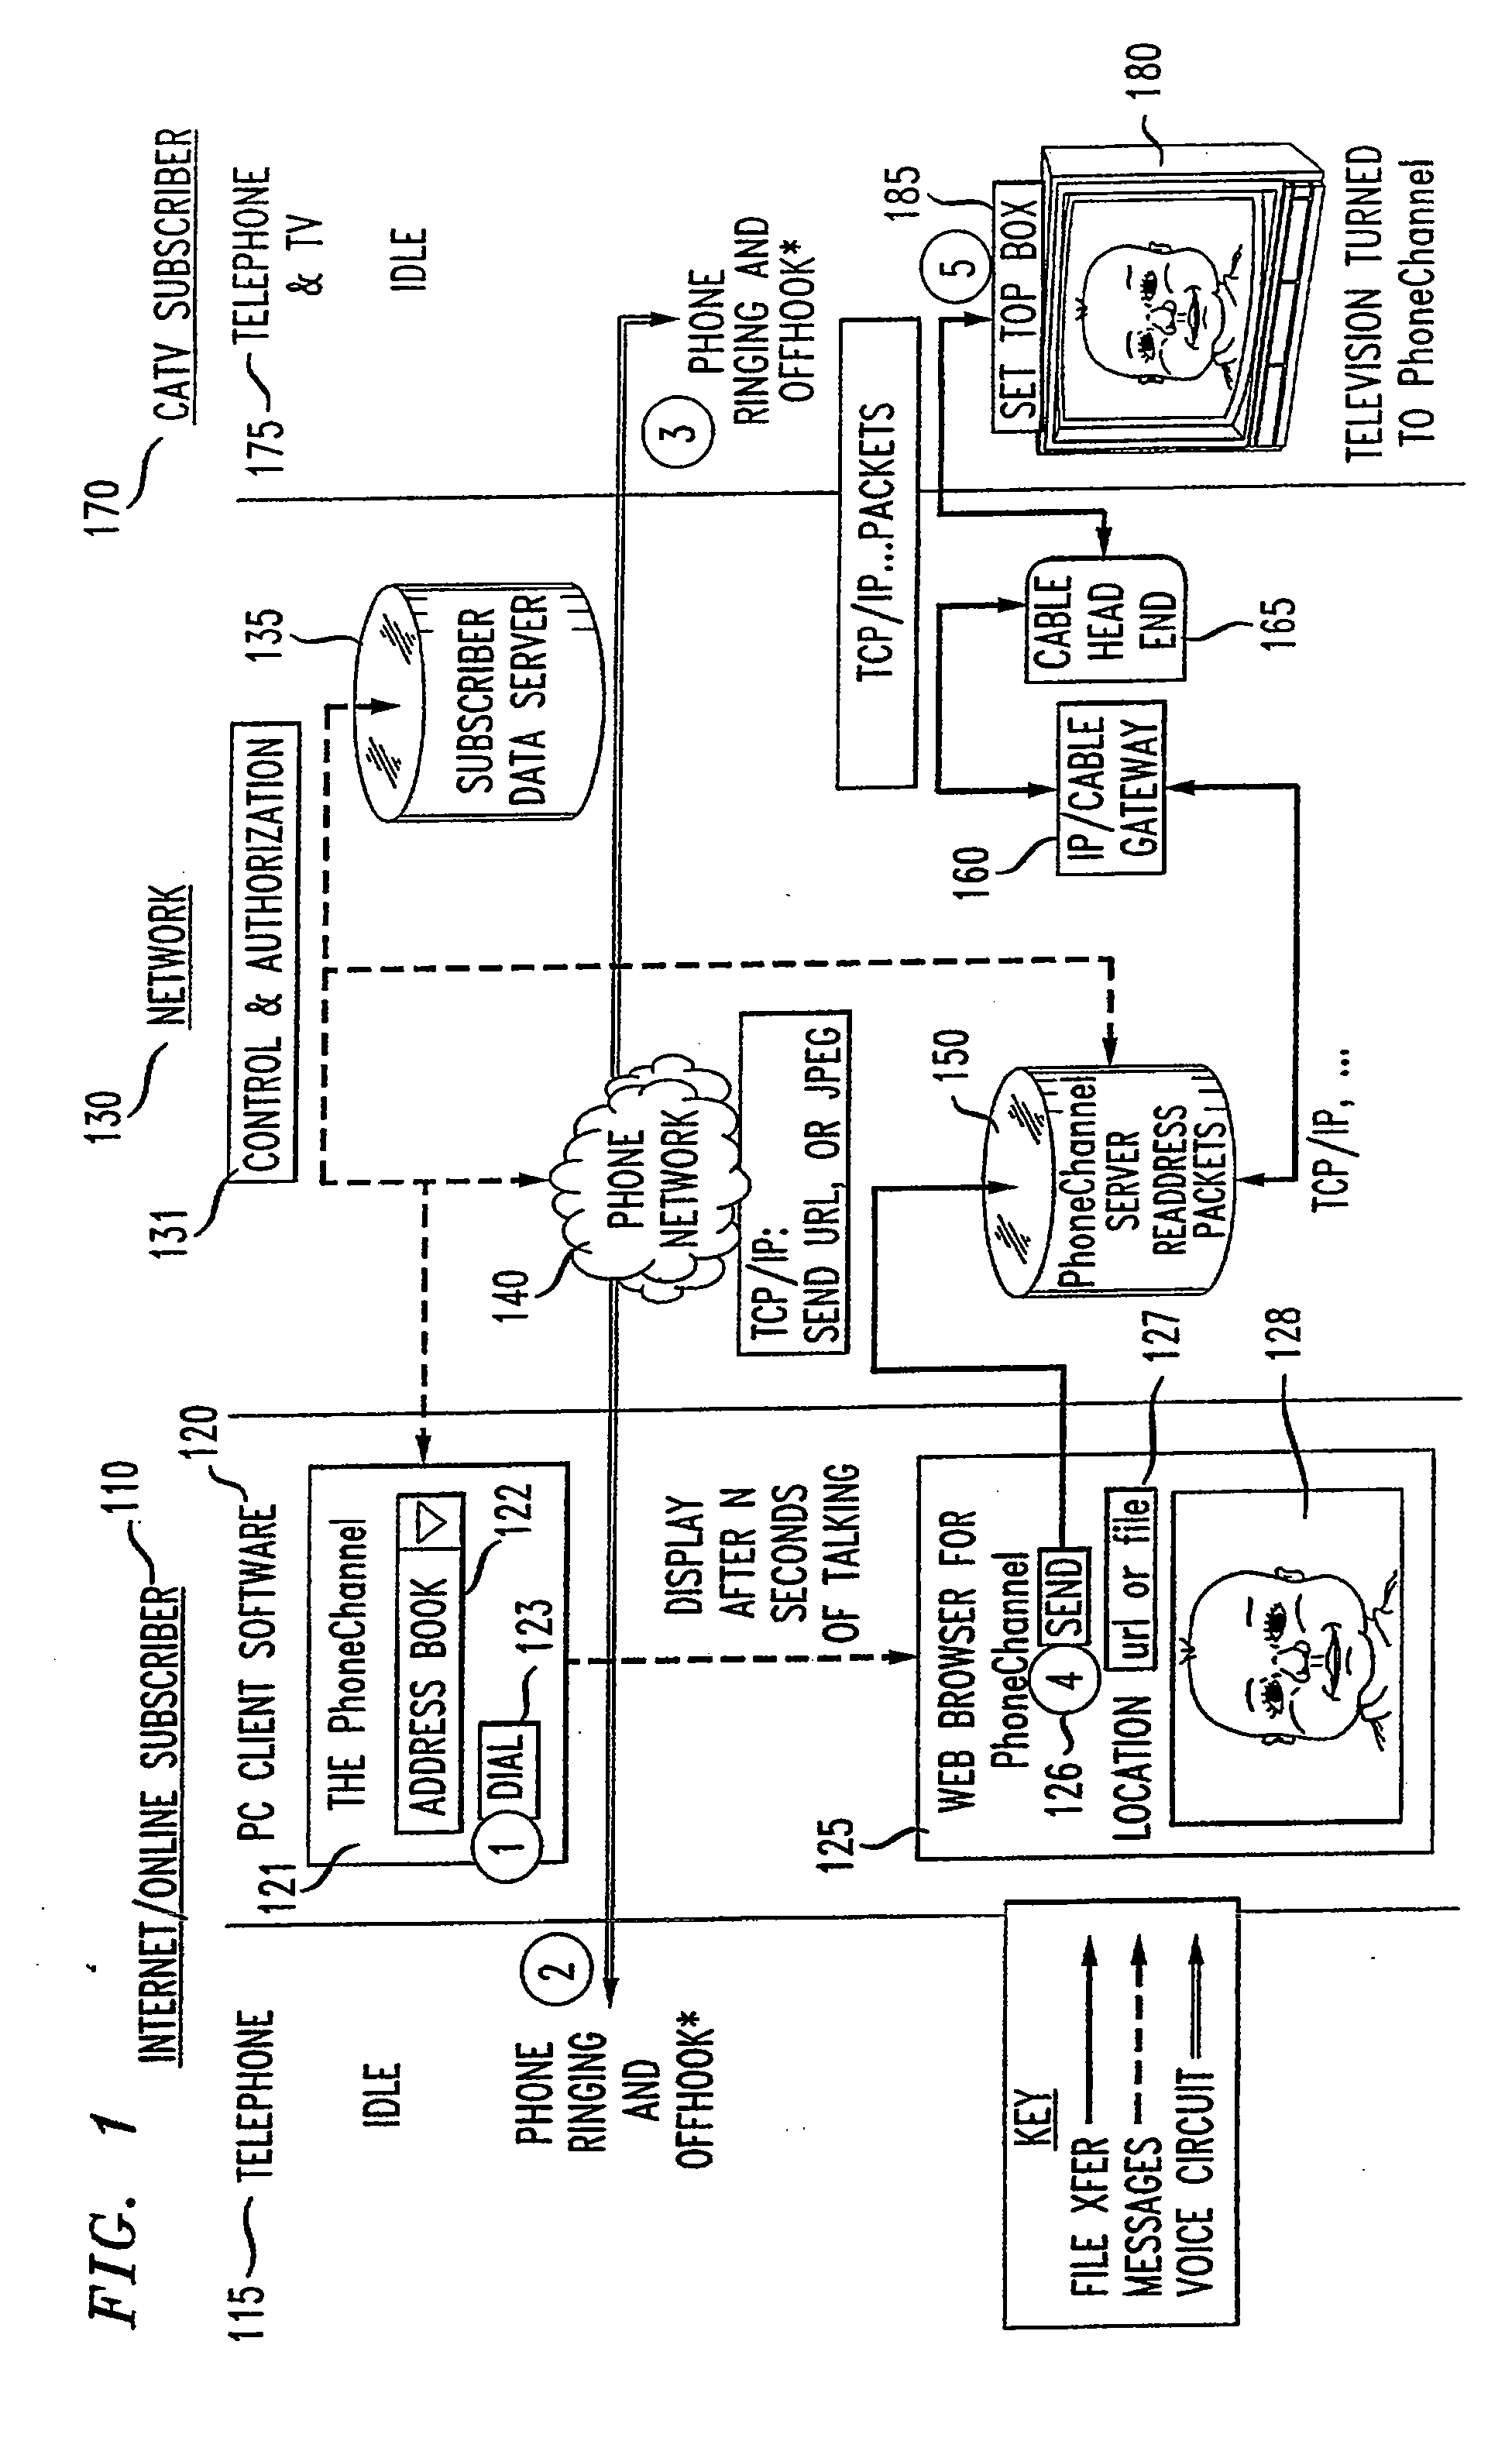 System and Method for Sharing Information